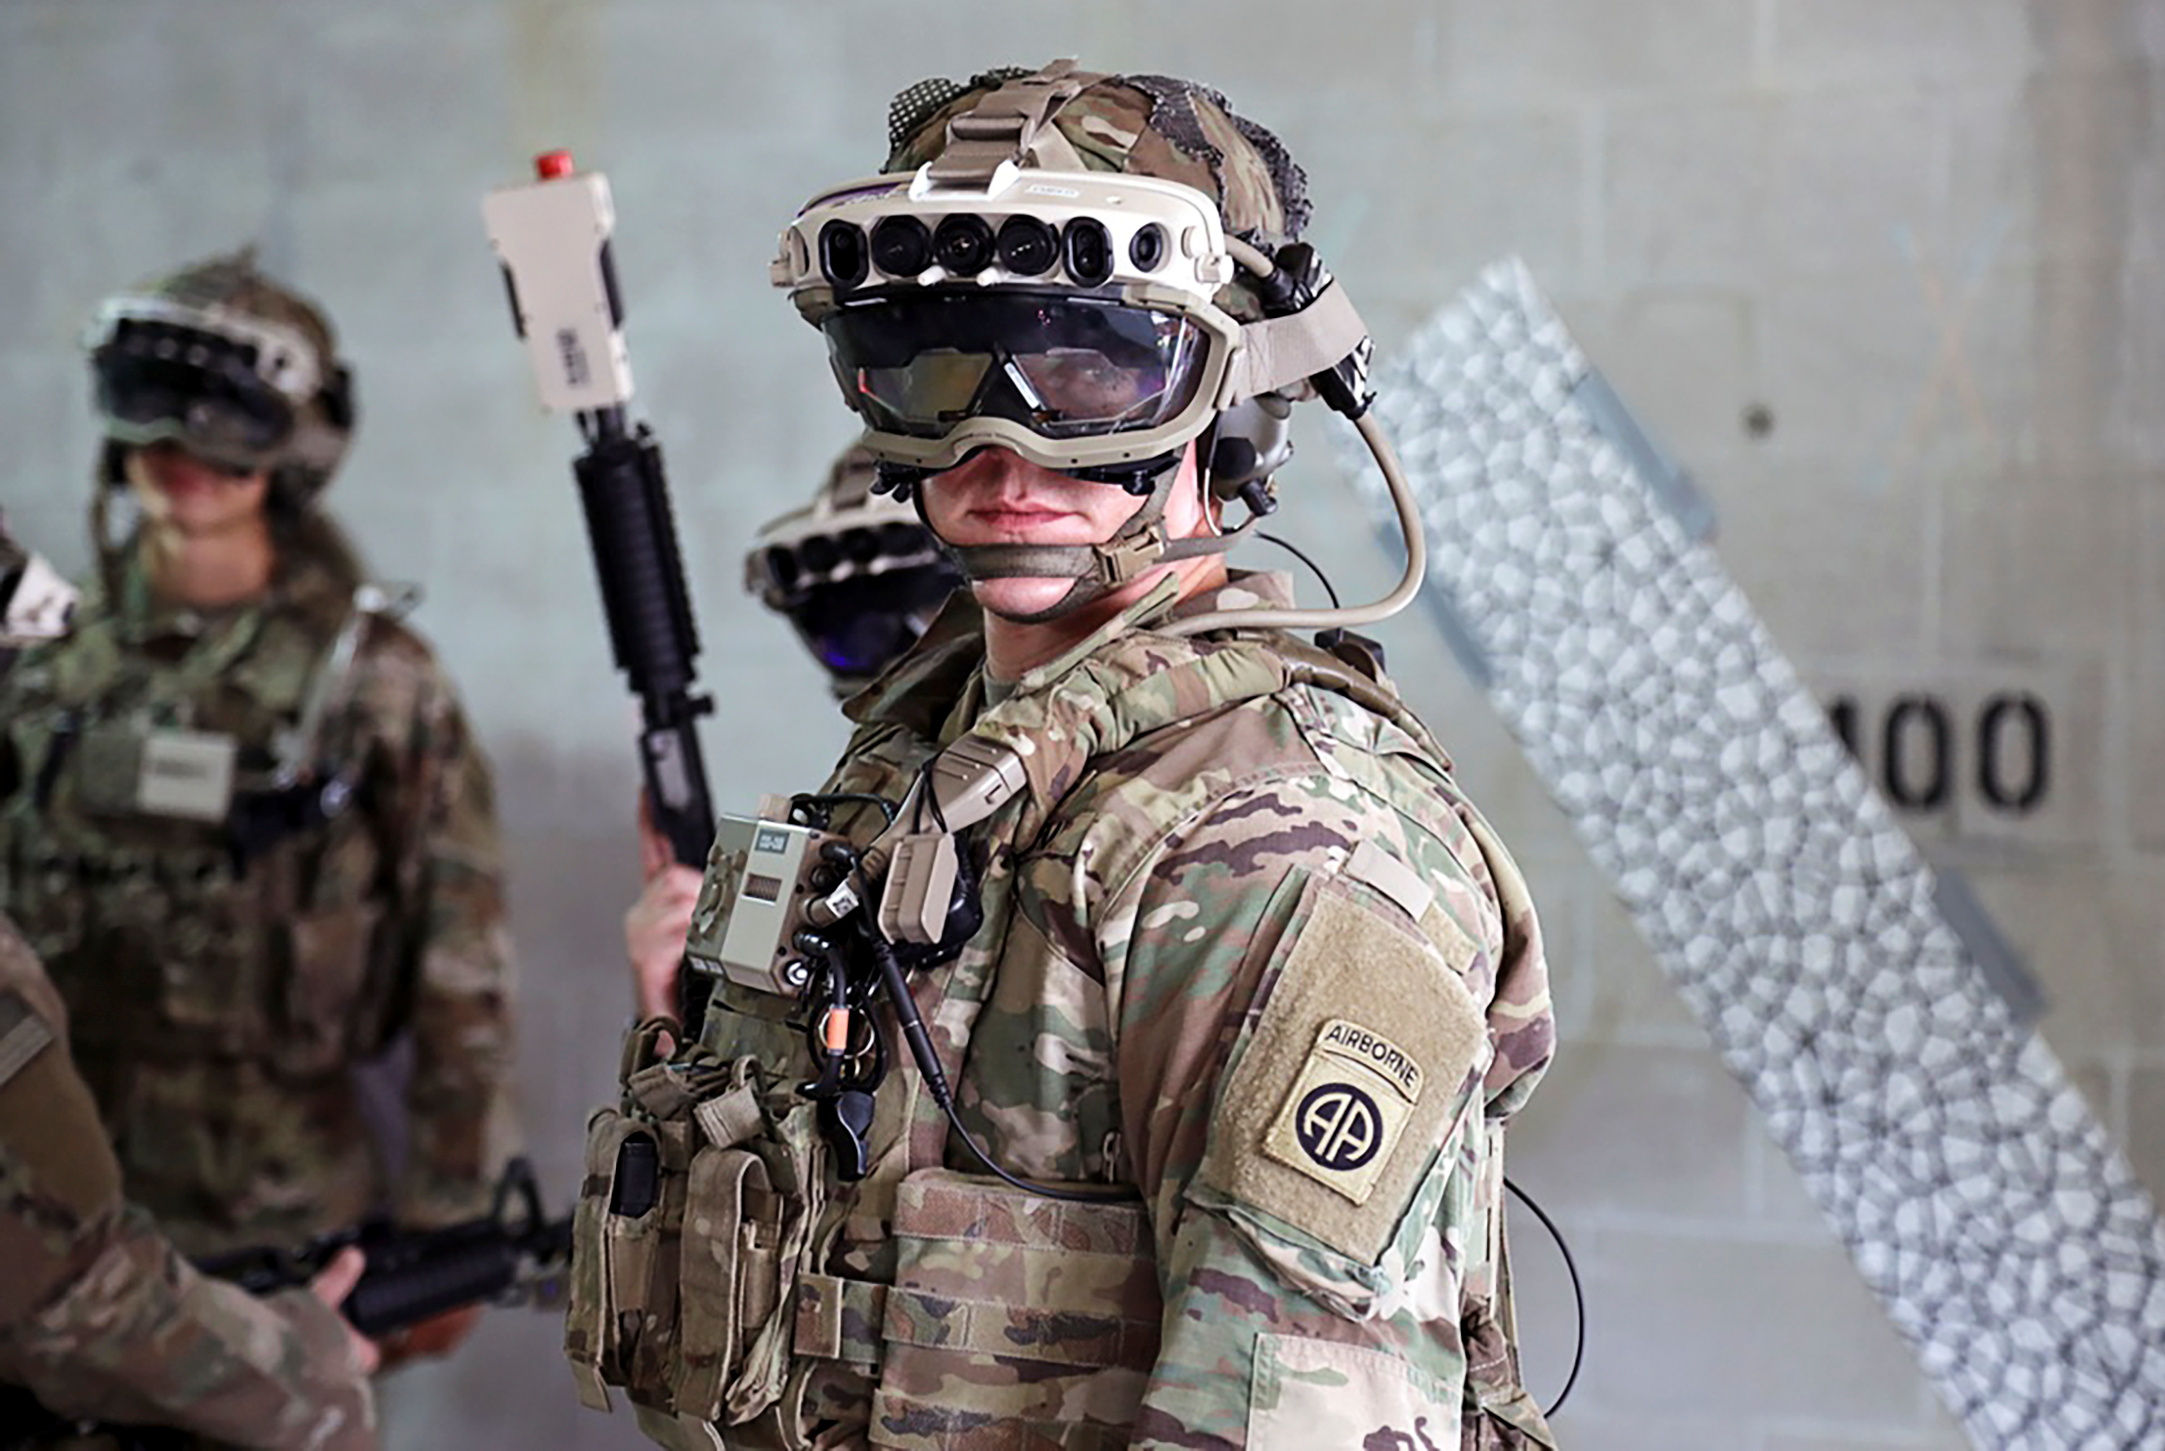 Soldiers don prototype of the Army’s augmented reality headsets during training at Fort Pickett, Virginia